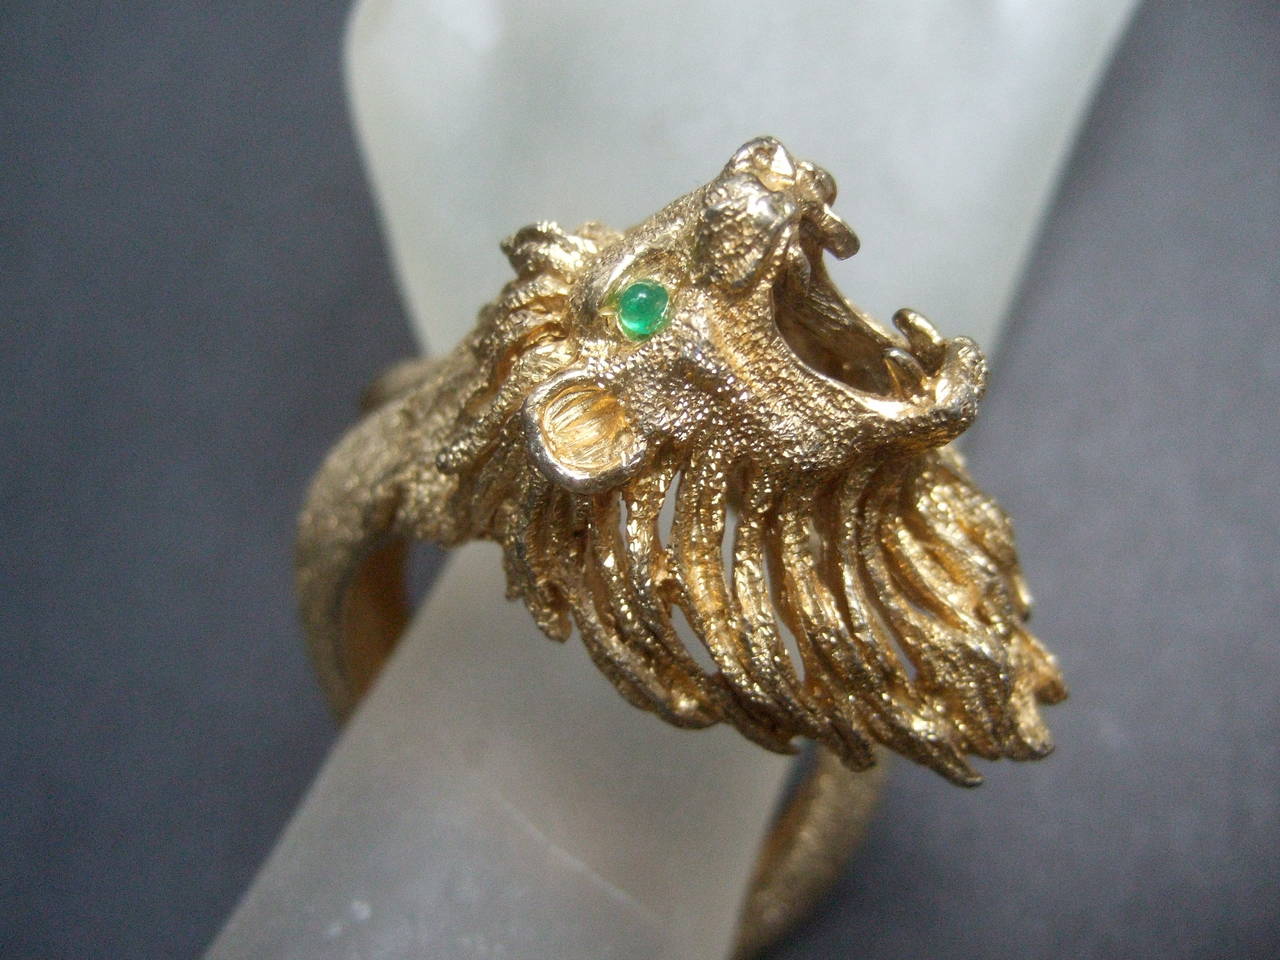 Ornate gilt metal lion bracelet designed by Les Bernard 
The figural costume bracelet is designed with an exotic 
gilt metal lions head embellished with green glass eyes 
The mane has sinuous wavy bands that emulate fur 

The lions expression